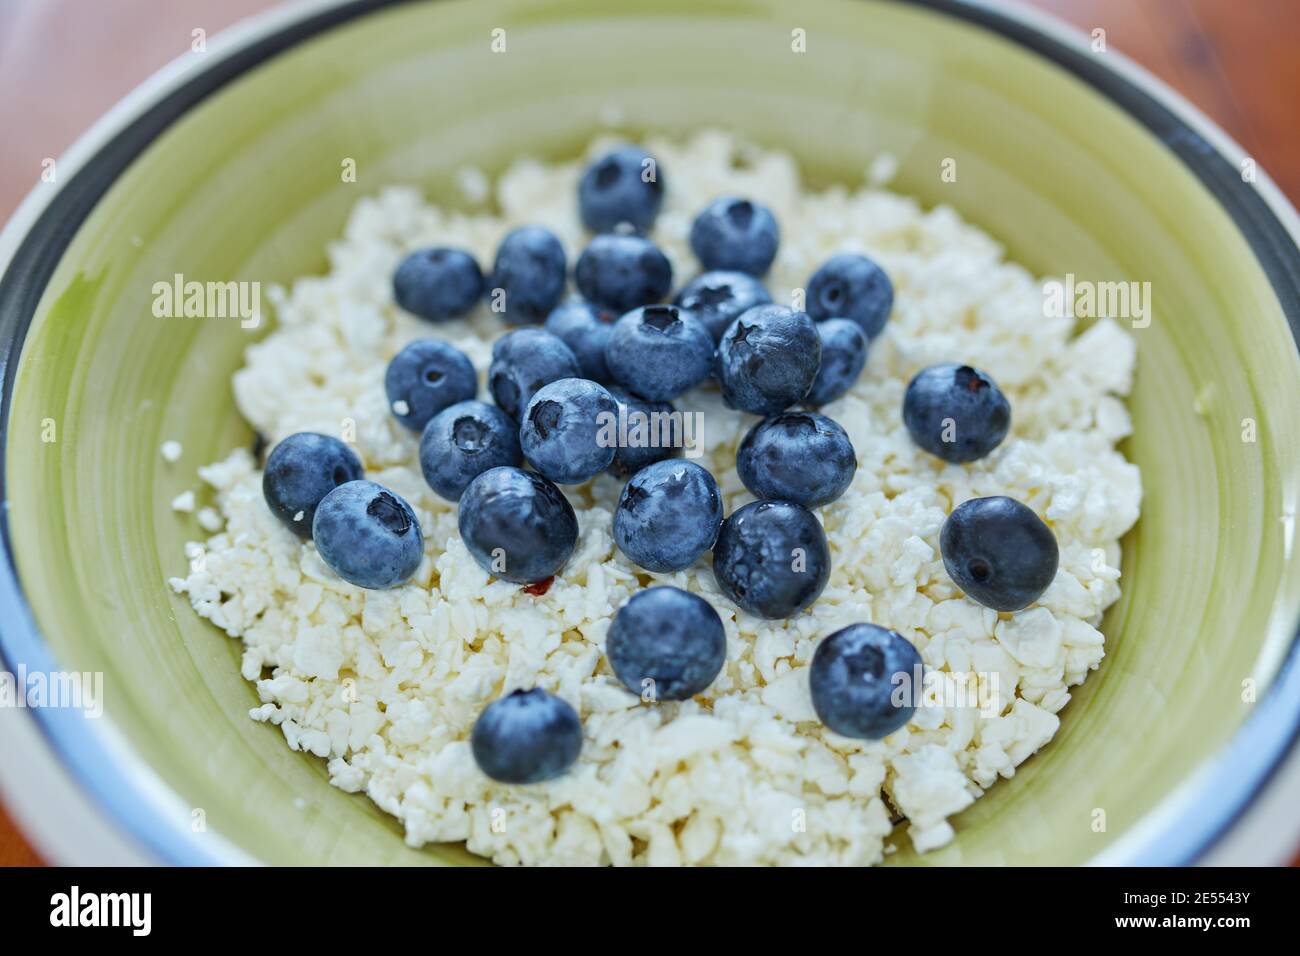 A bowl of cottage cheese with blueberries Stock Photo